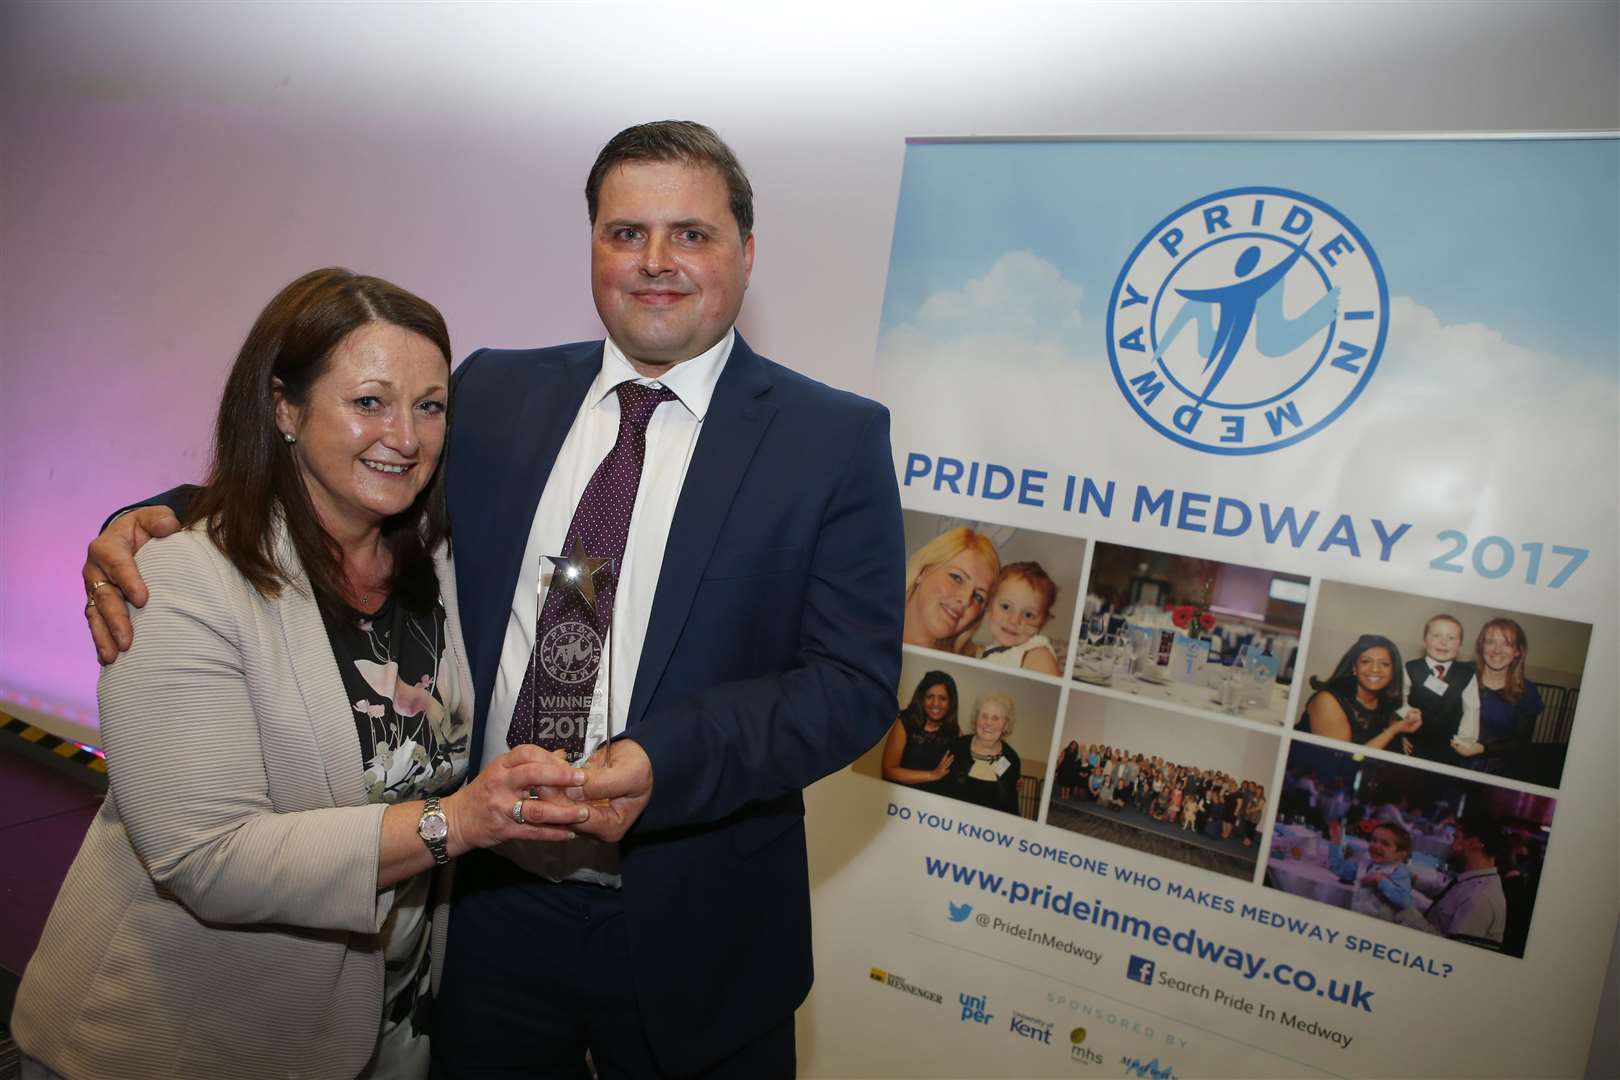 Pride in Medway Awards 2017 winners Liz and Darren Shaw from One Big Family - Helping the Homeless.